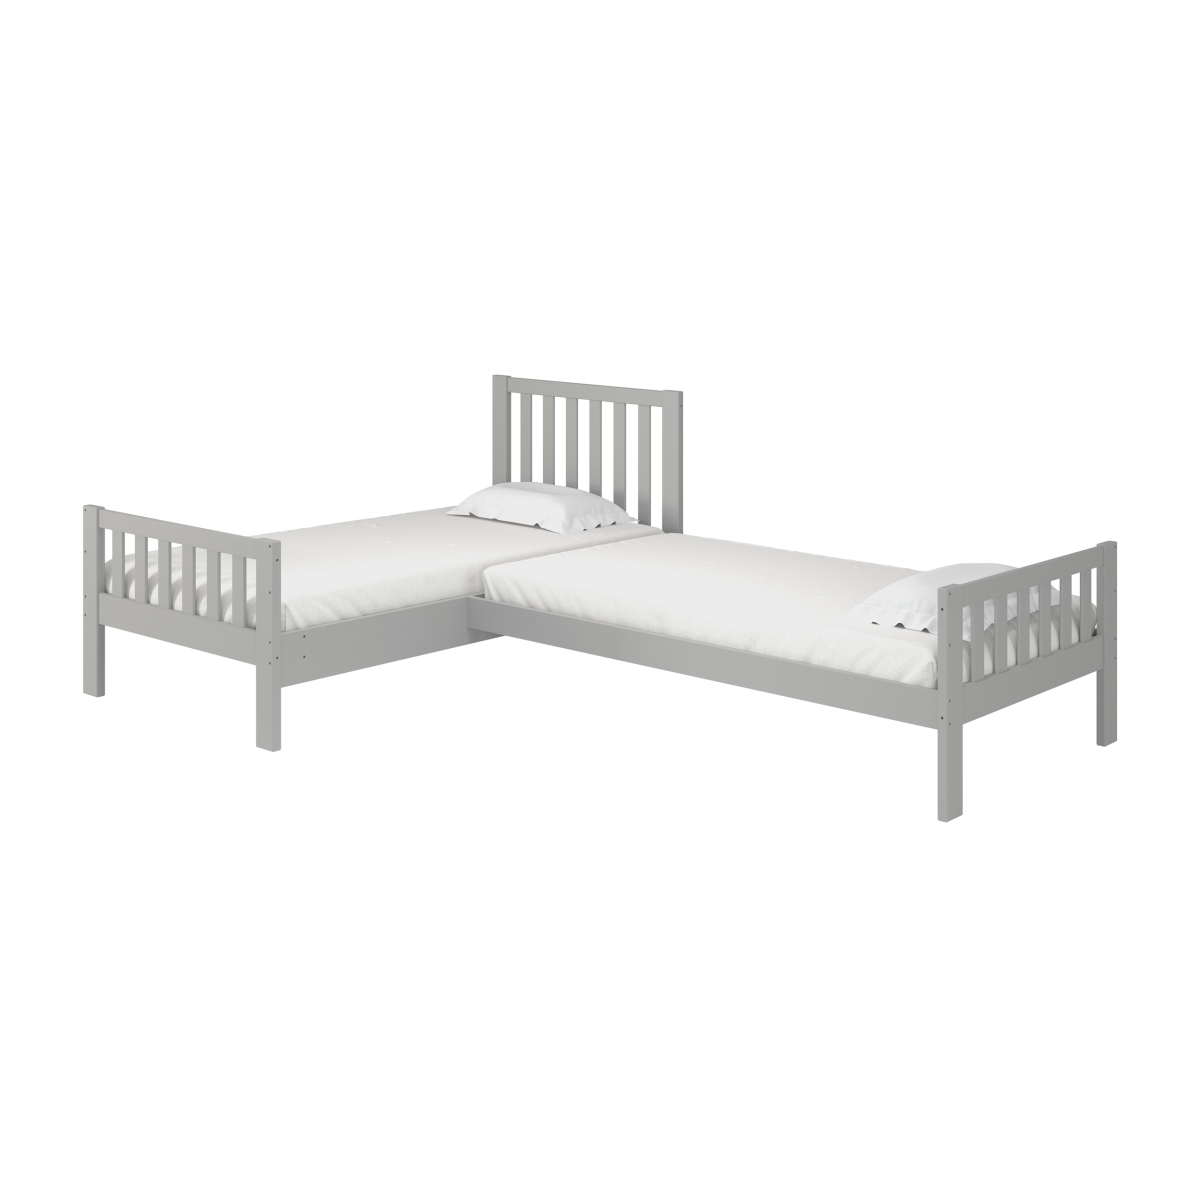 Picture of Alaterre AJAU1180 Aurora Corner L-Shaped Twin Wood Bed Set, Dove Gray